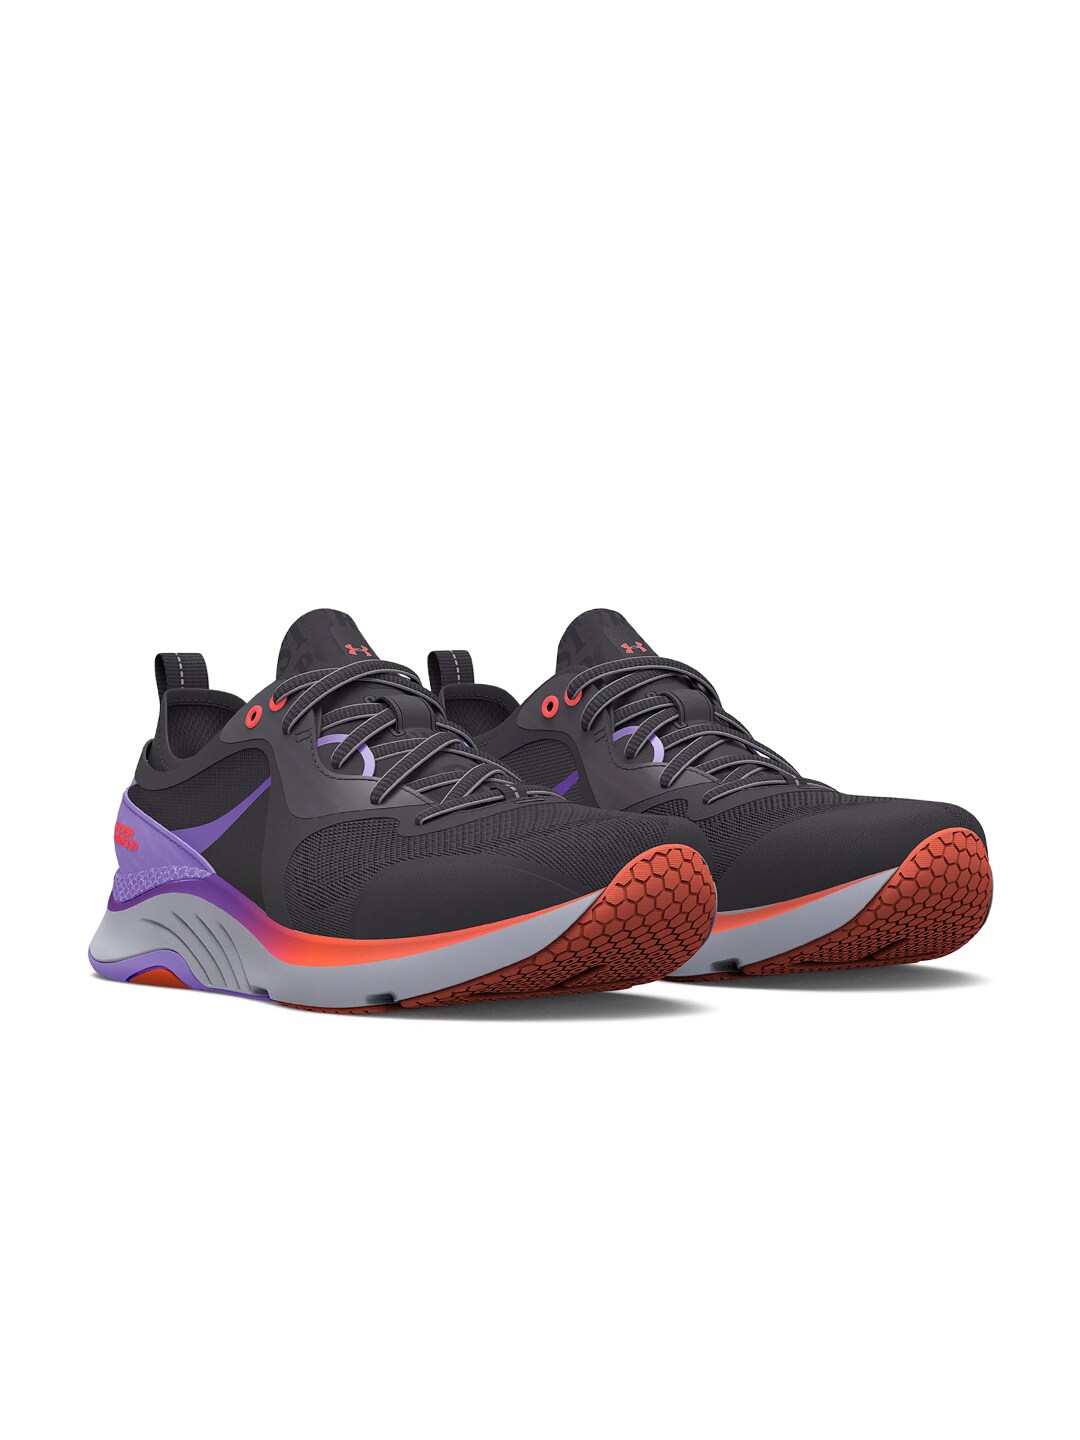 UNDER ARMOUR Women Grey HOVR Omnia IWD Training Shoes Price in India